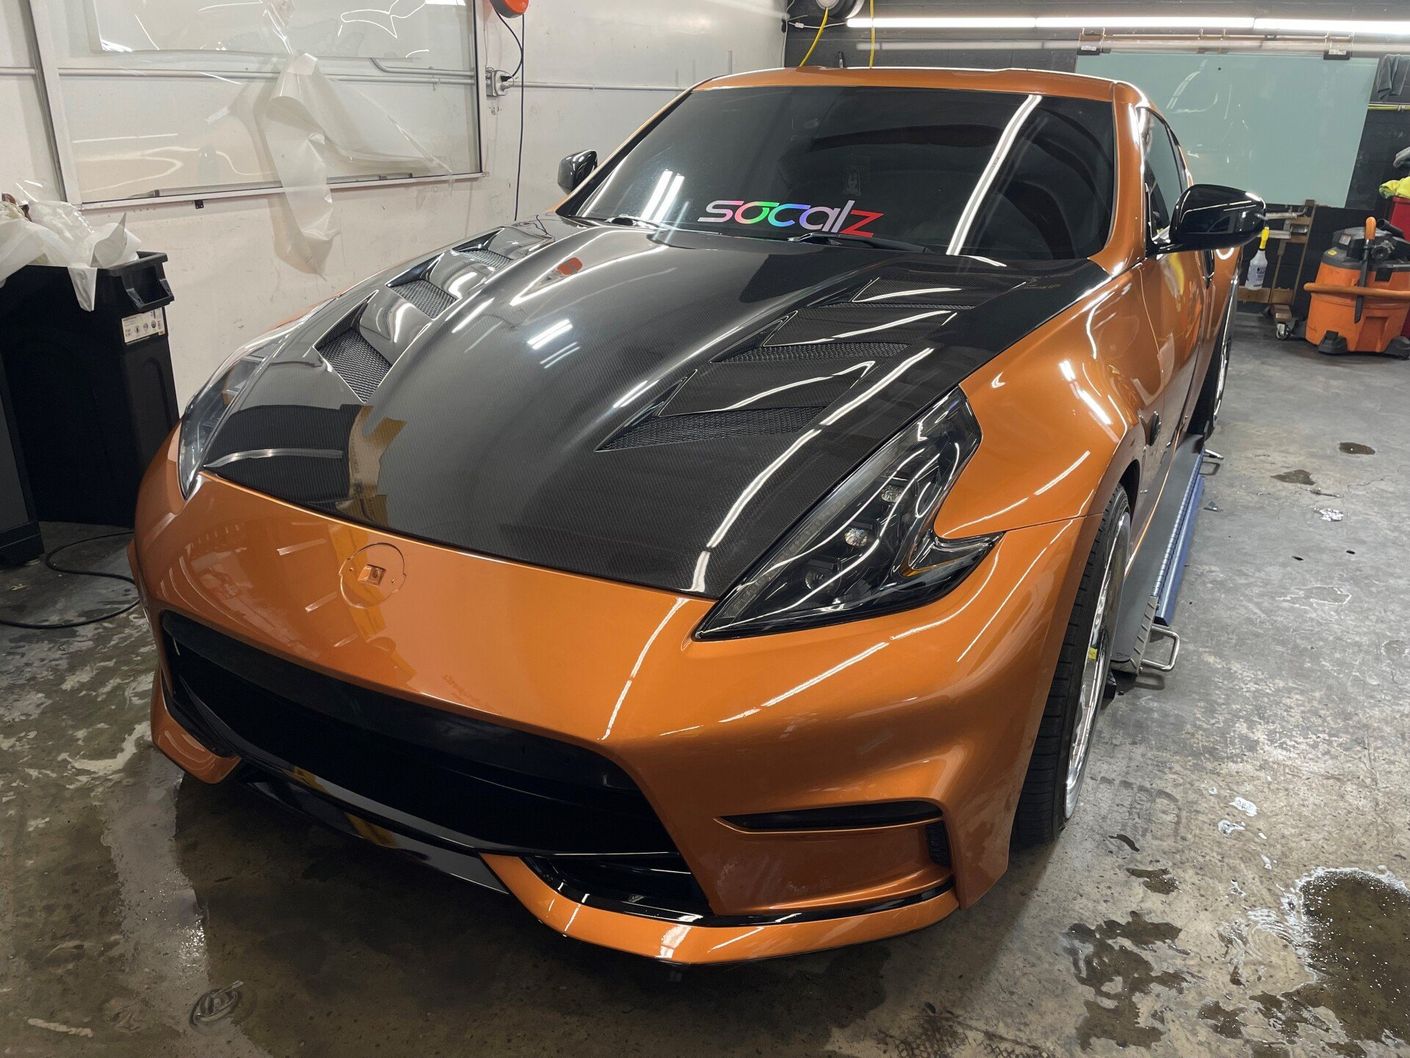 Sportscar with Paint Protection Film | Upland, CA | The SoCal Auto Salon